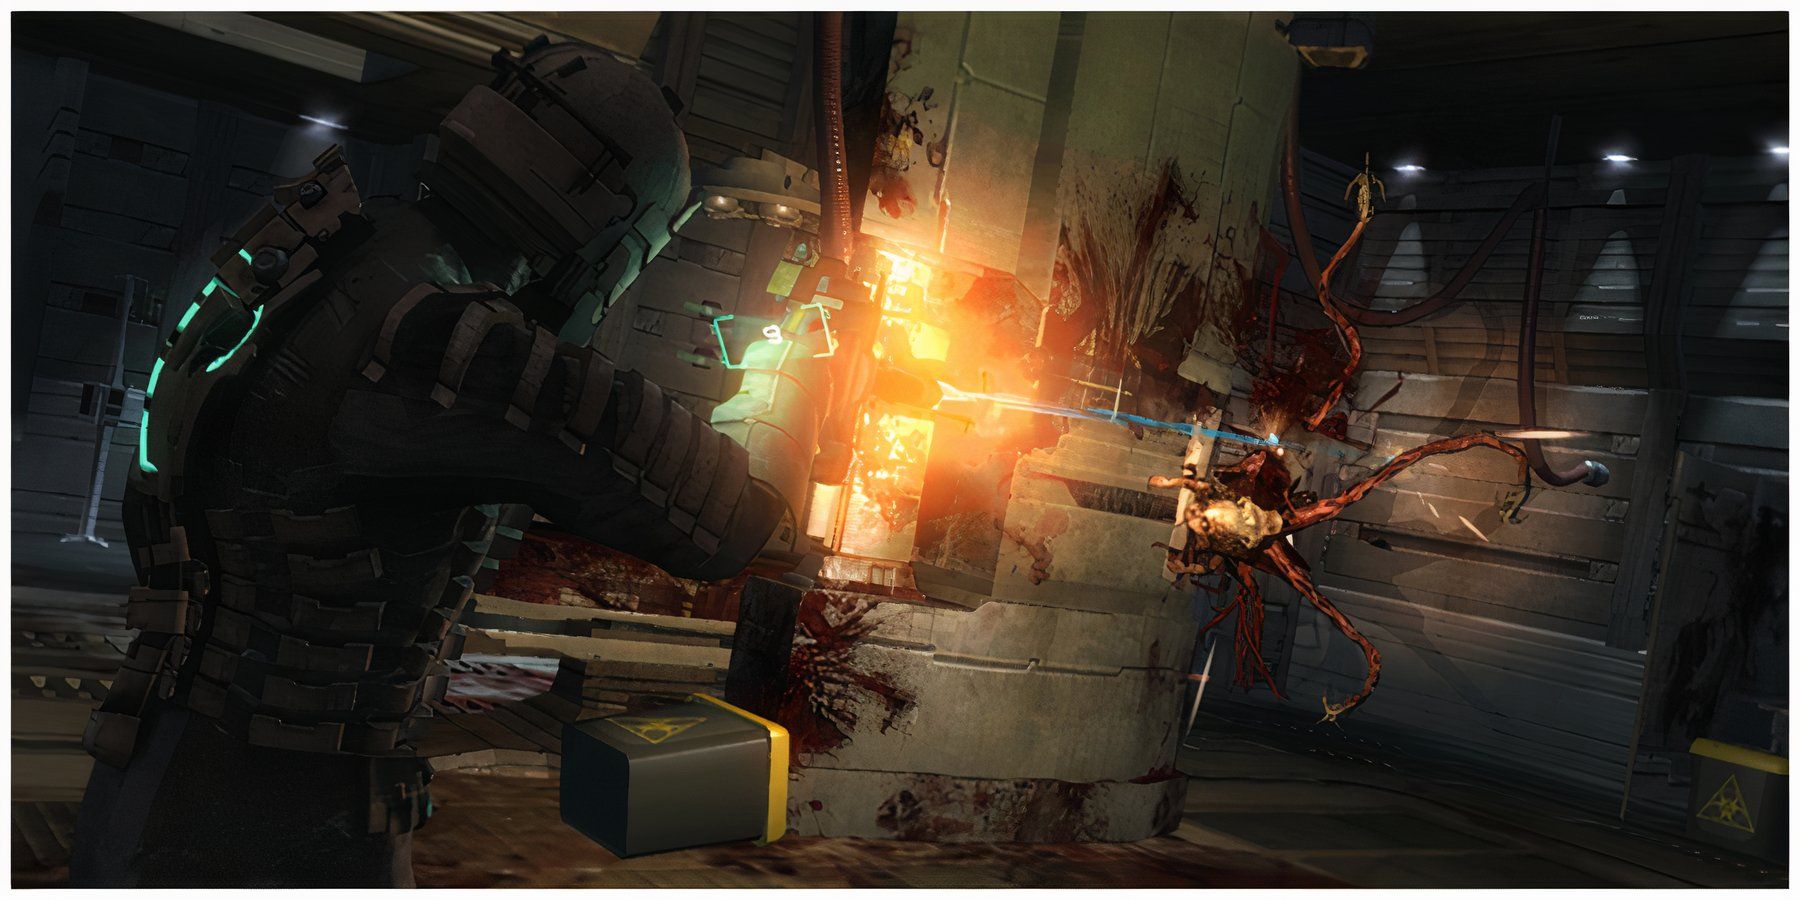 Third person combat in Dead Space 1 using the pistol